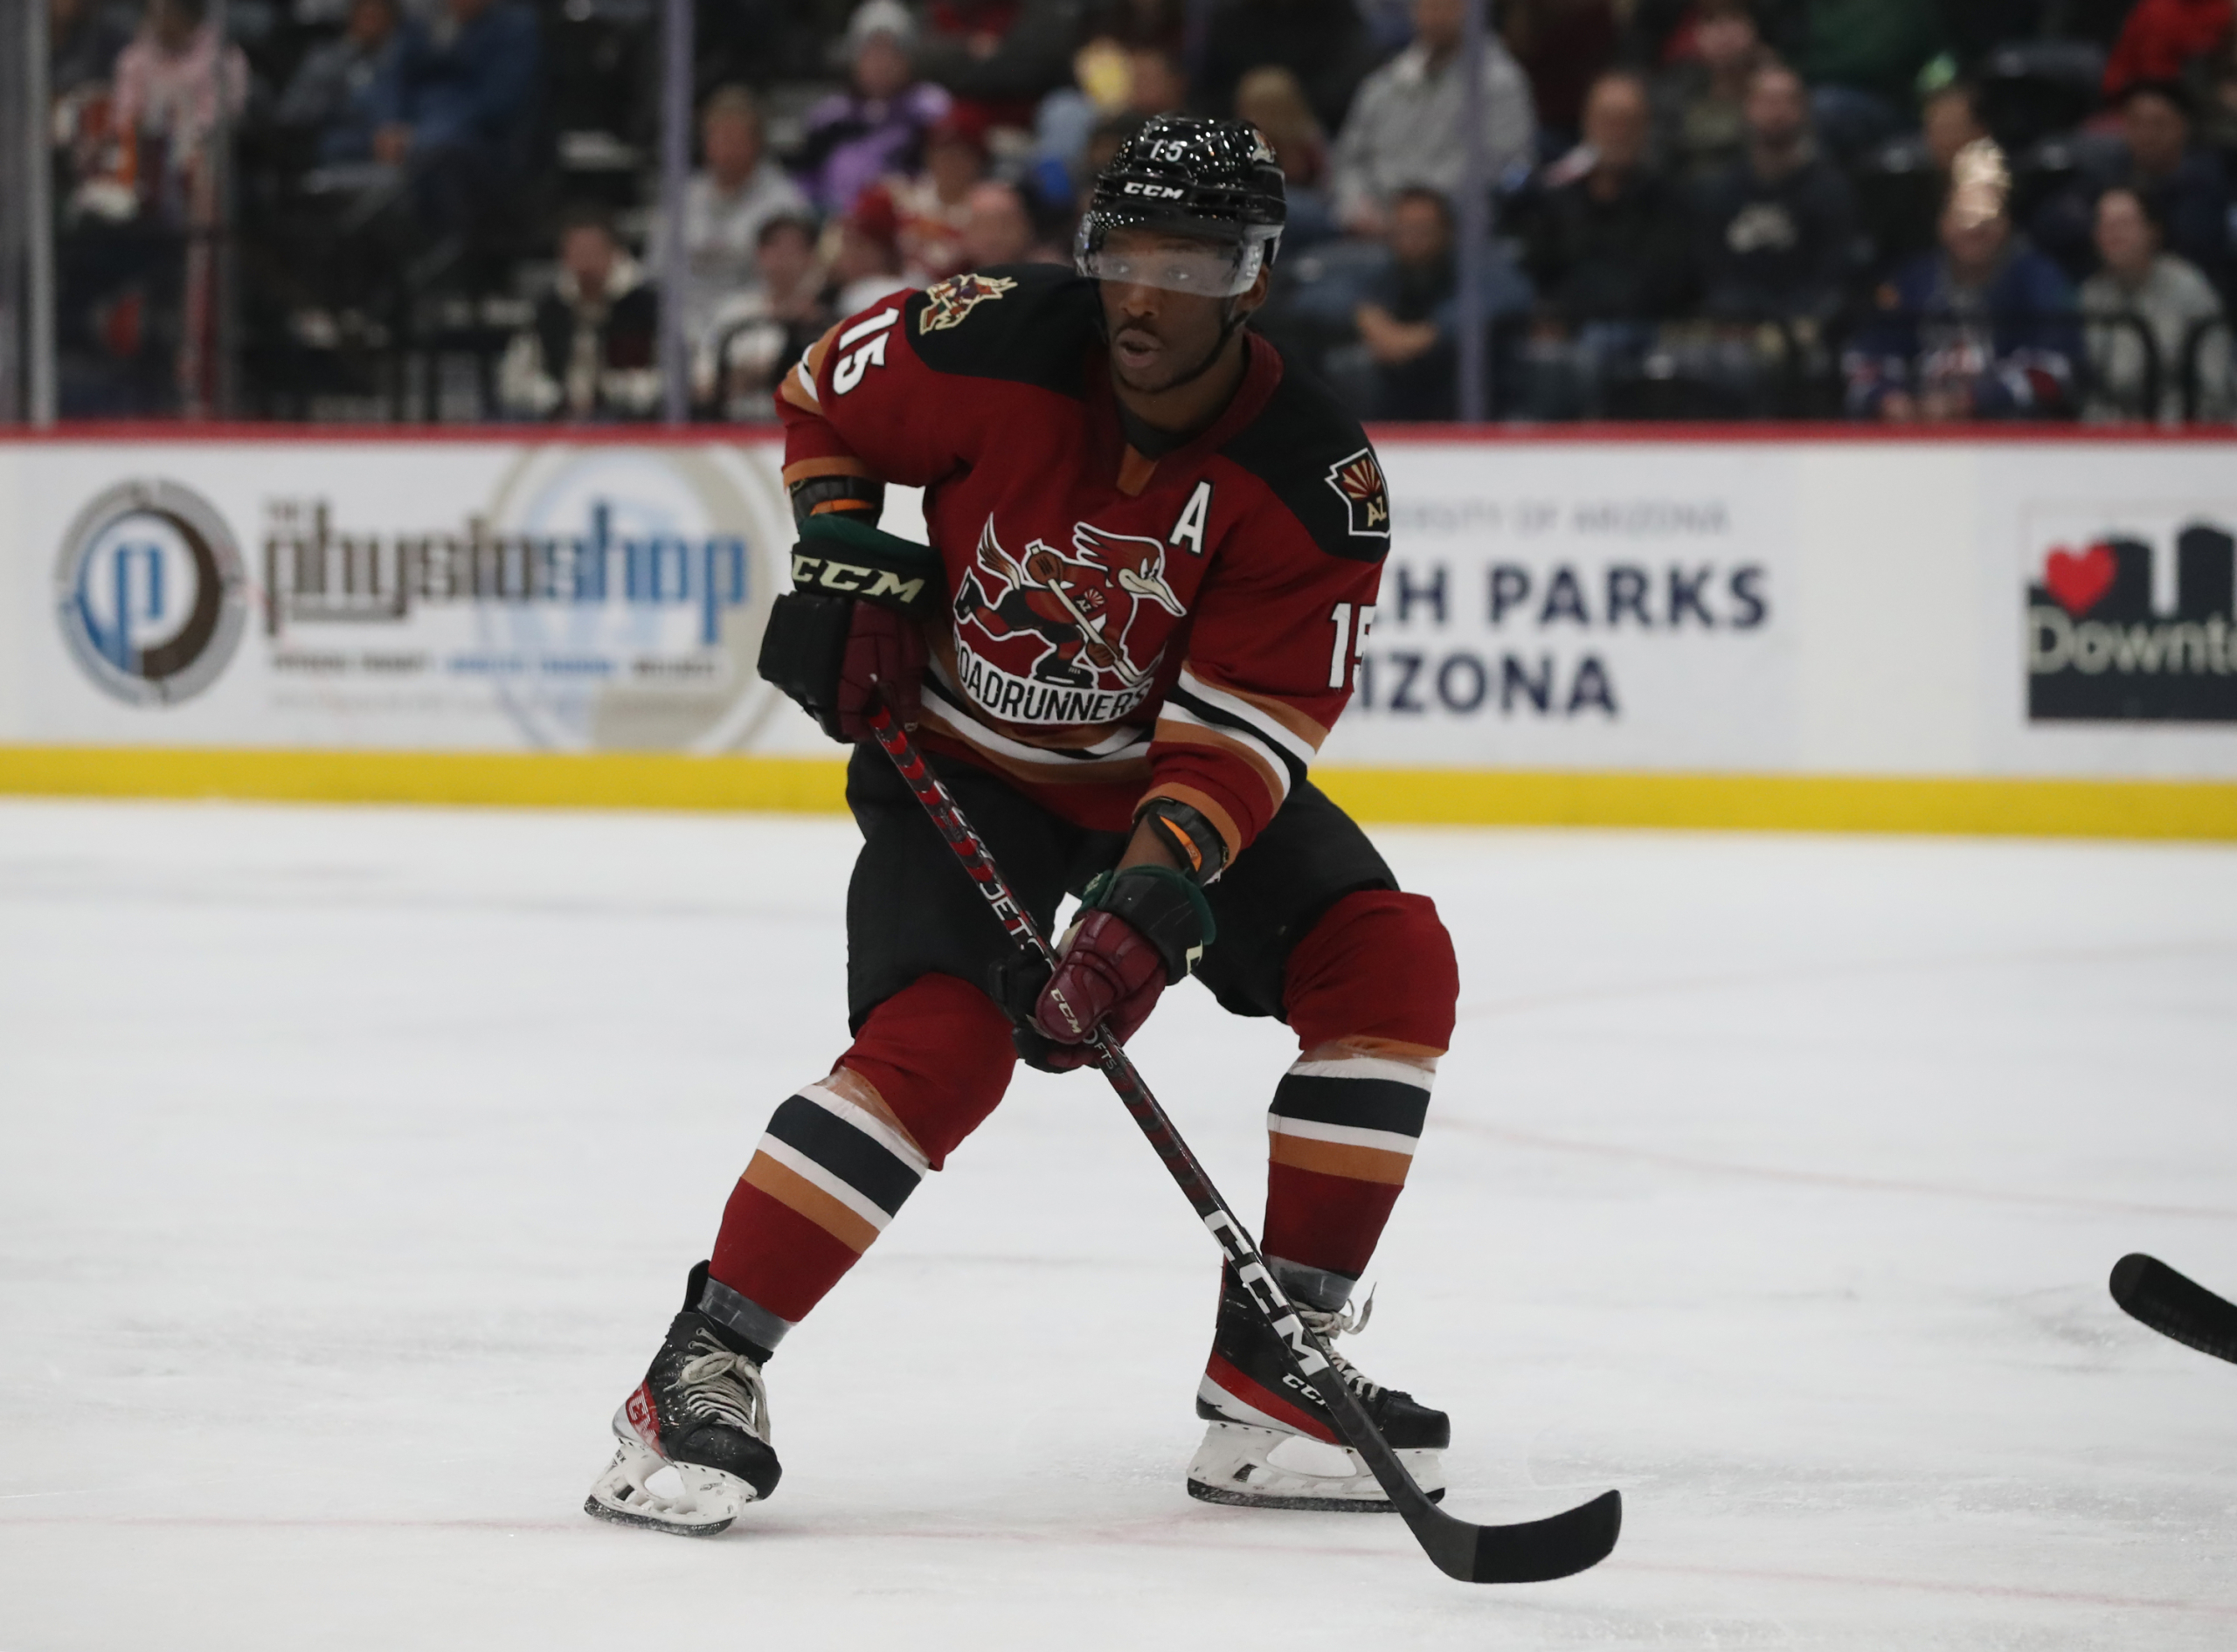 Roadrunners to debut own Kachina jersey Saturday at home